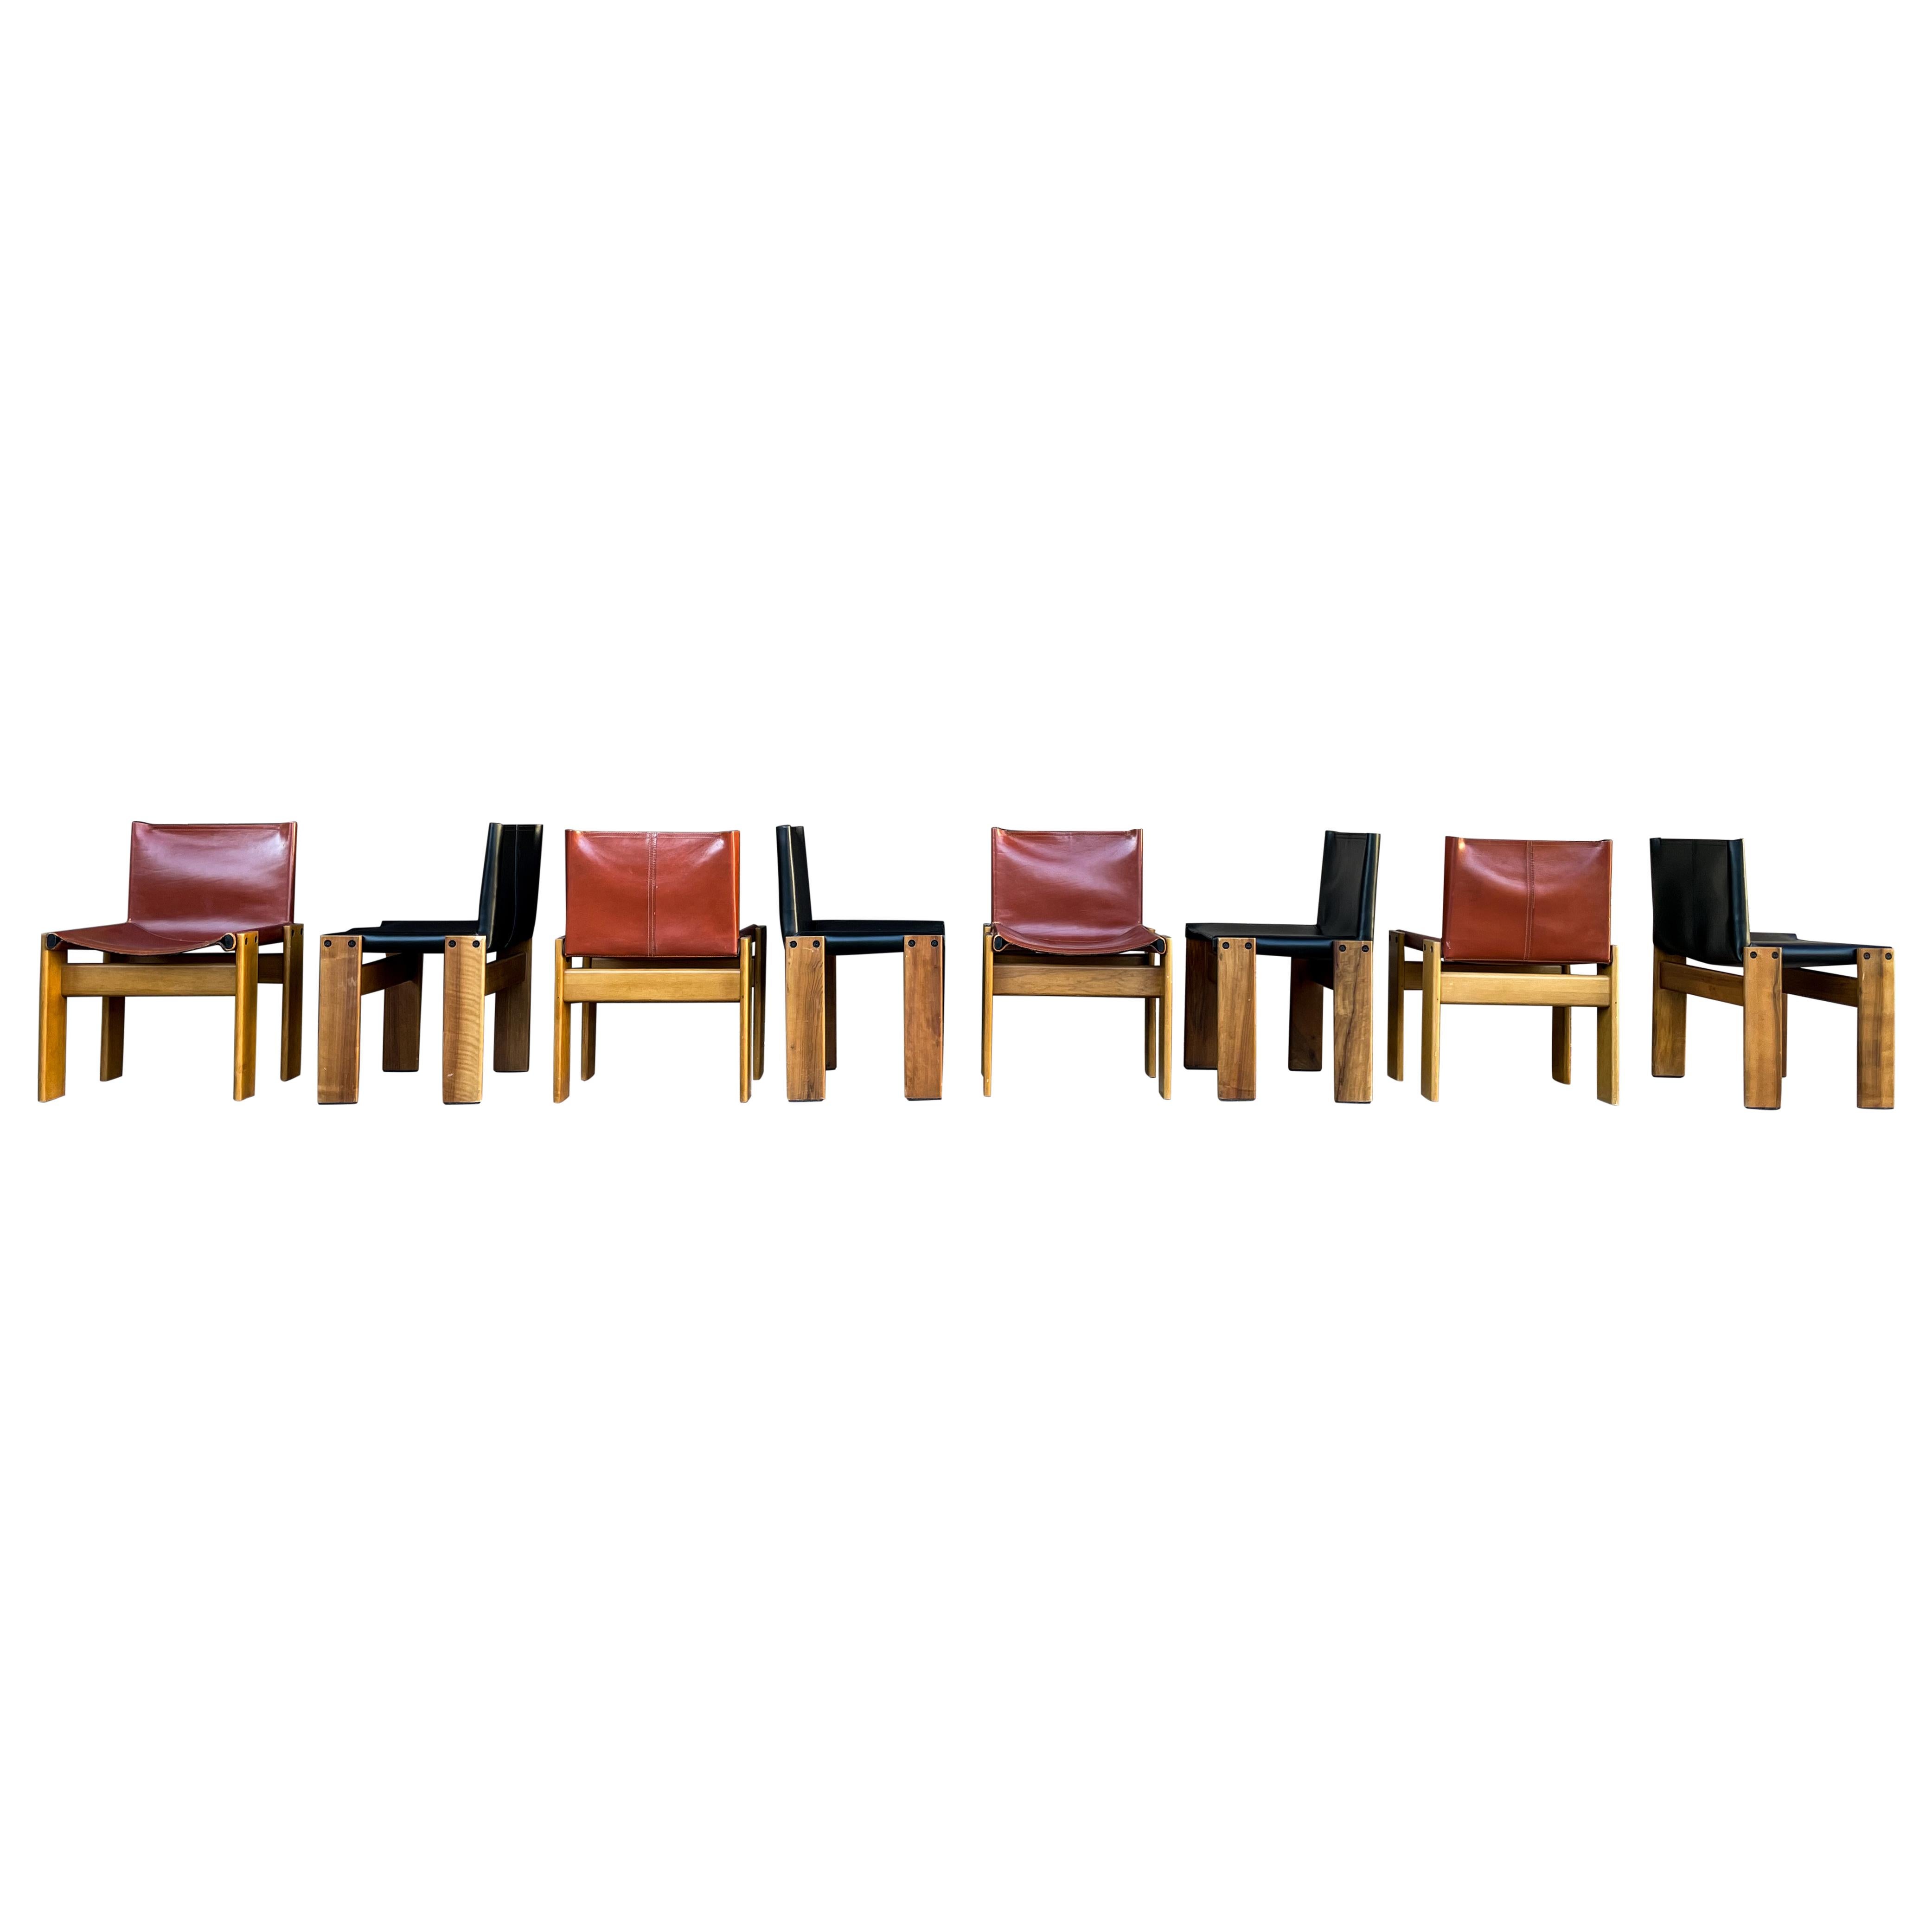 Set of eight “Monk” dining chairs designed by Afra and Tobia Scarpa for Molteni in 1973.

Made of black and brick leather and walnut.

Fully restored in Italy.

Interesting is the ‘flat’ shape of this chair where the designer has chosen to